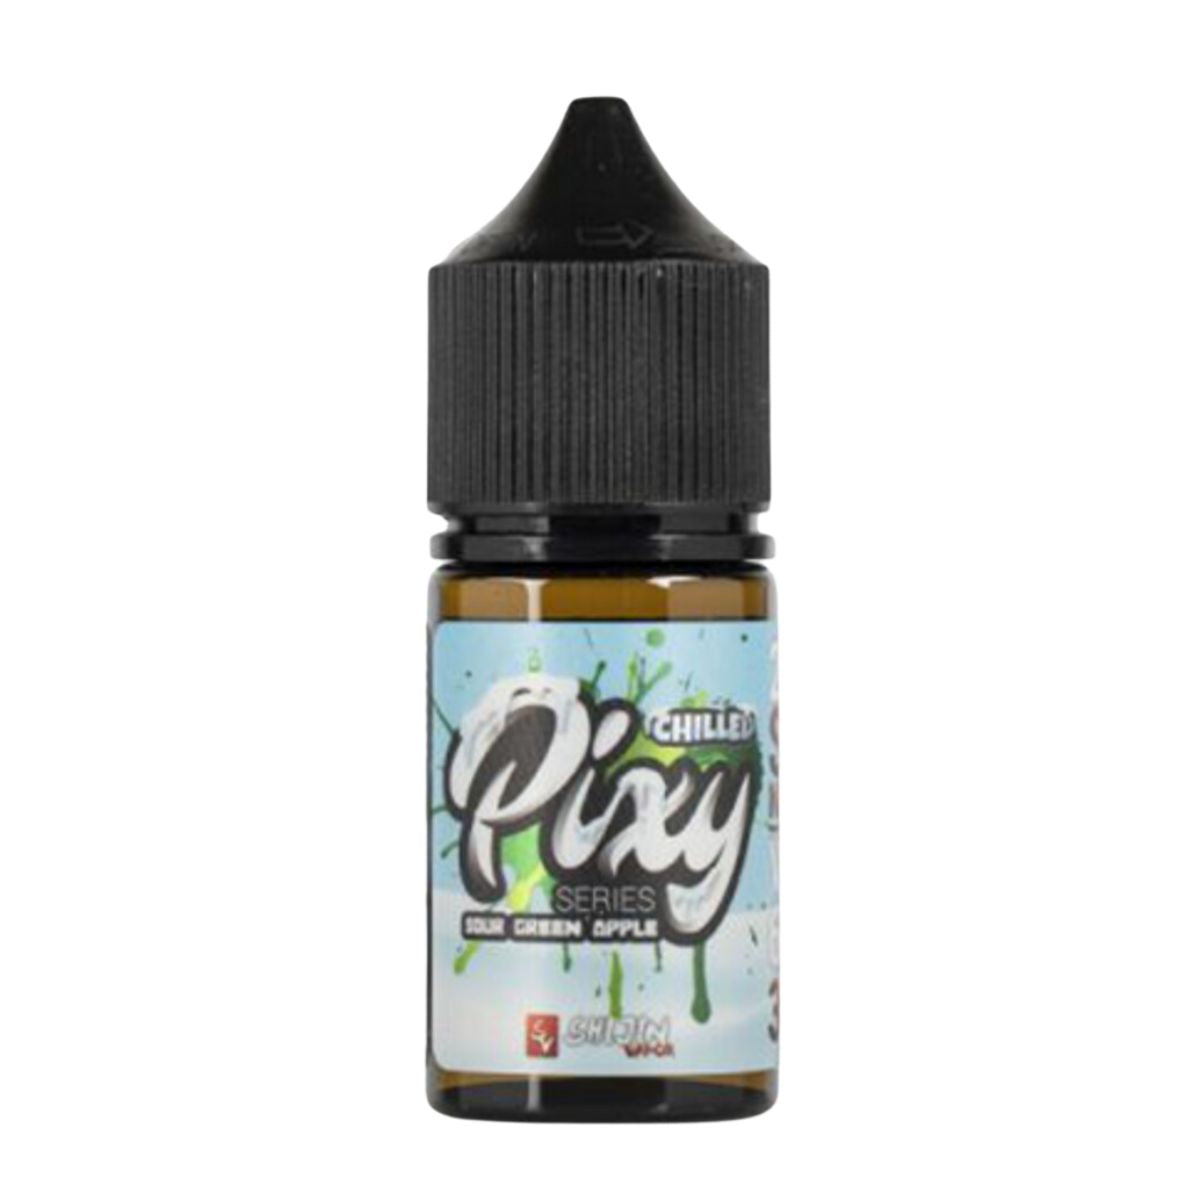 Sour Green Apple Chilled by It's Pixy Series 100mL bottle